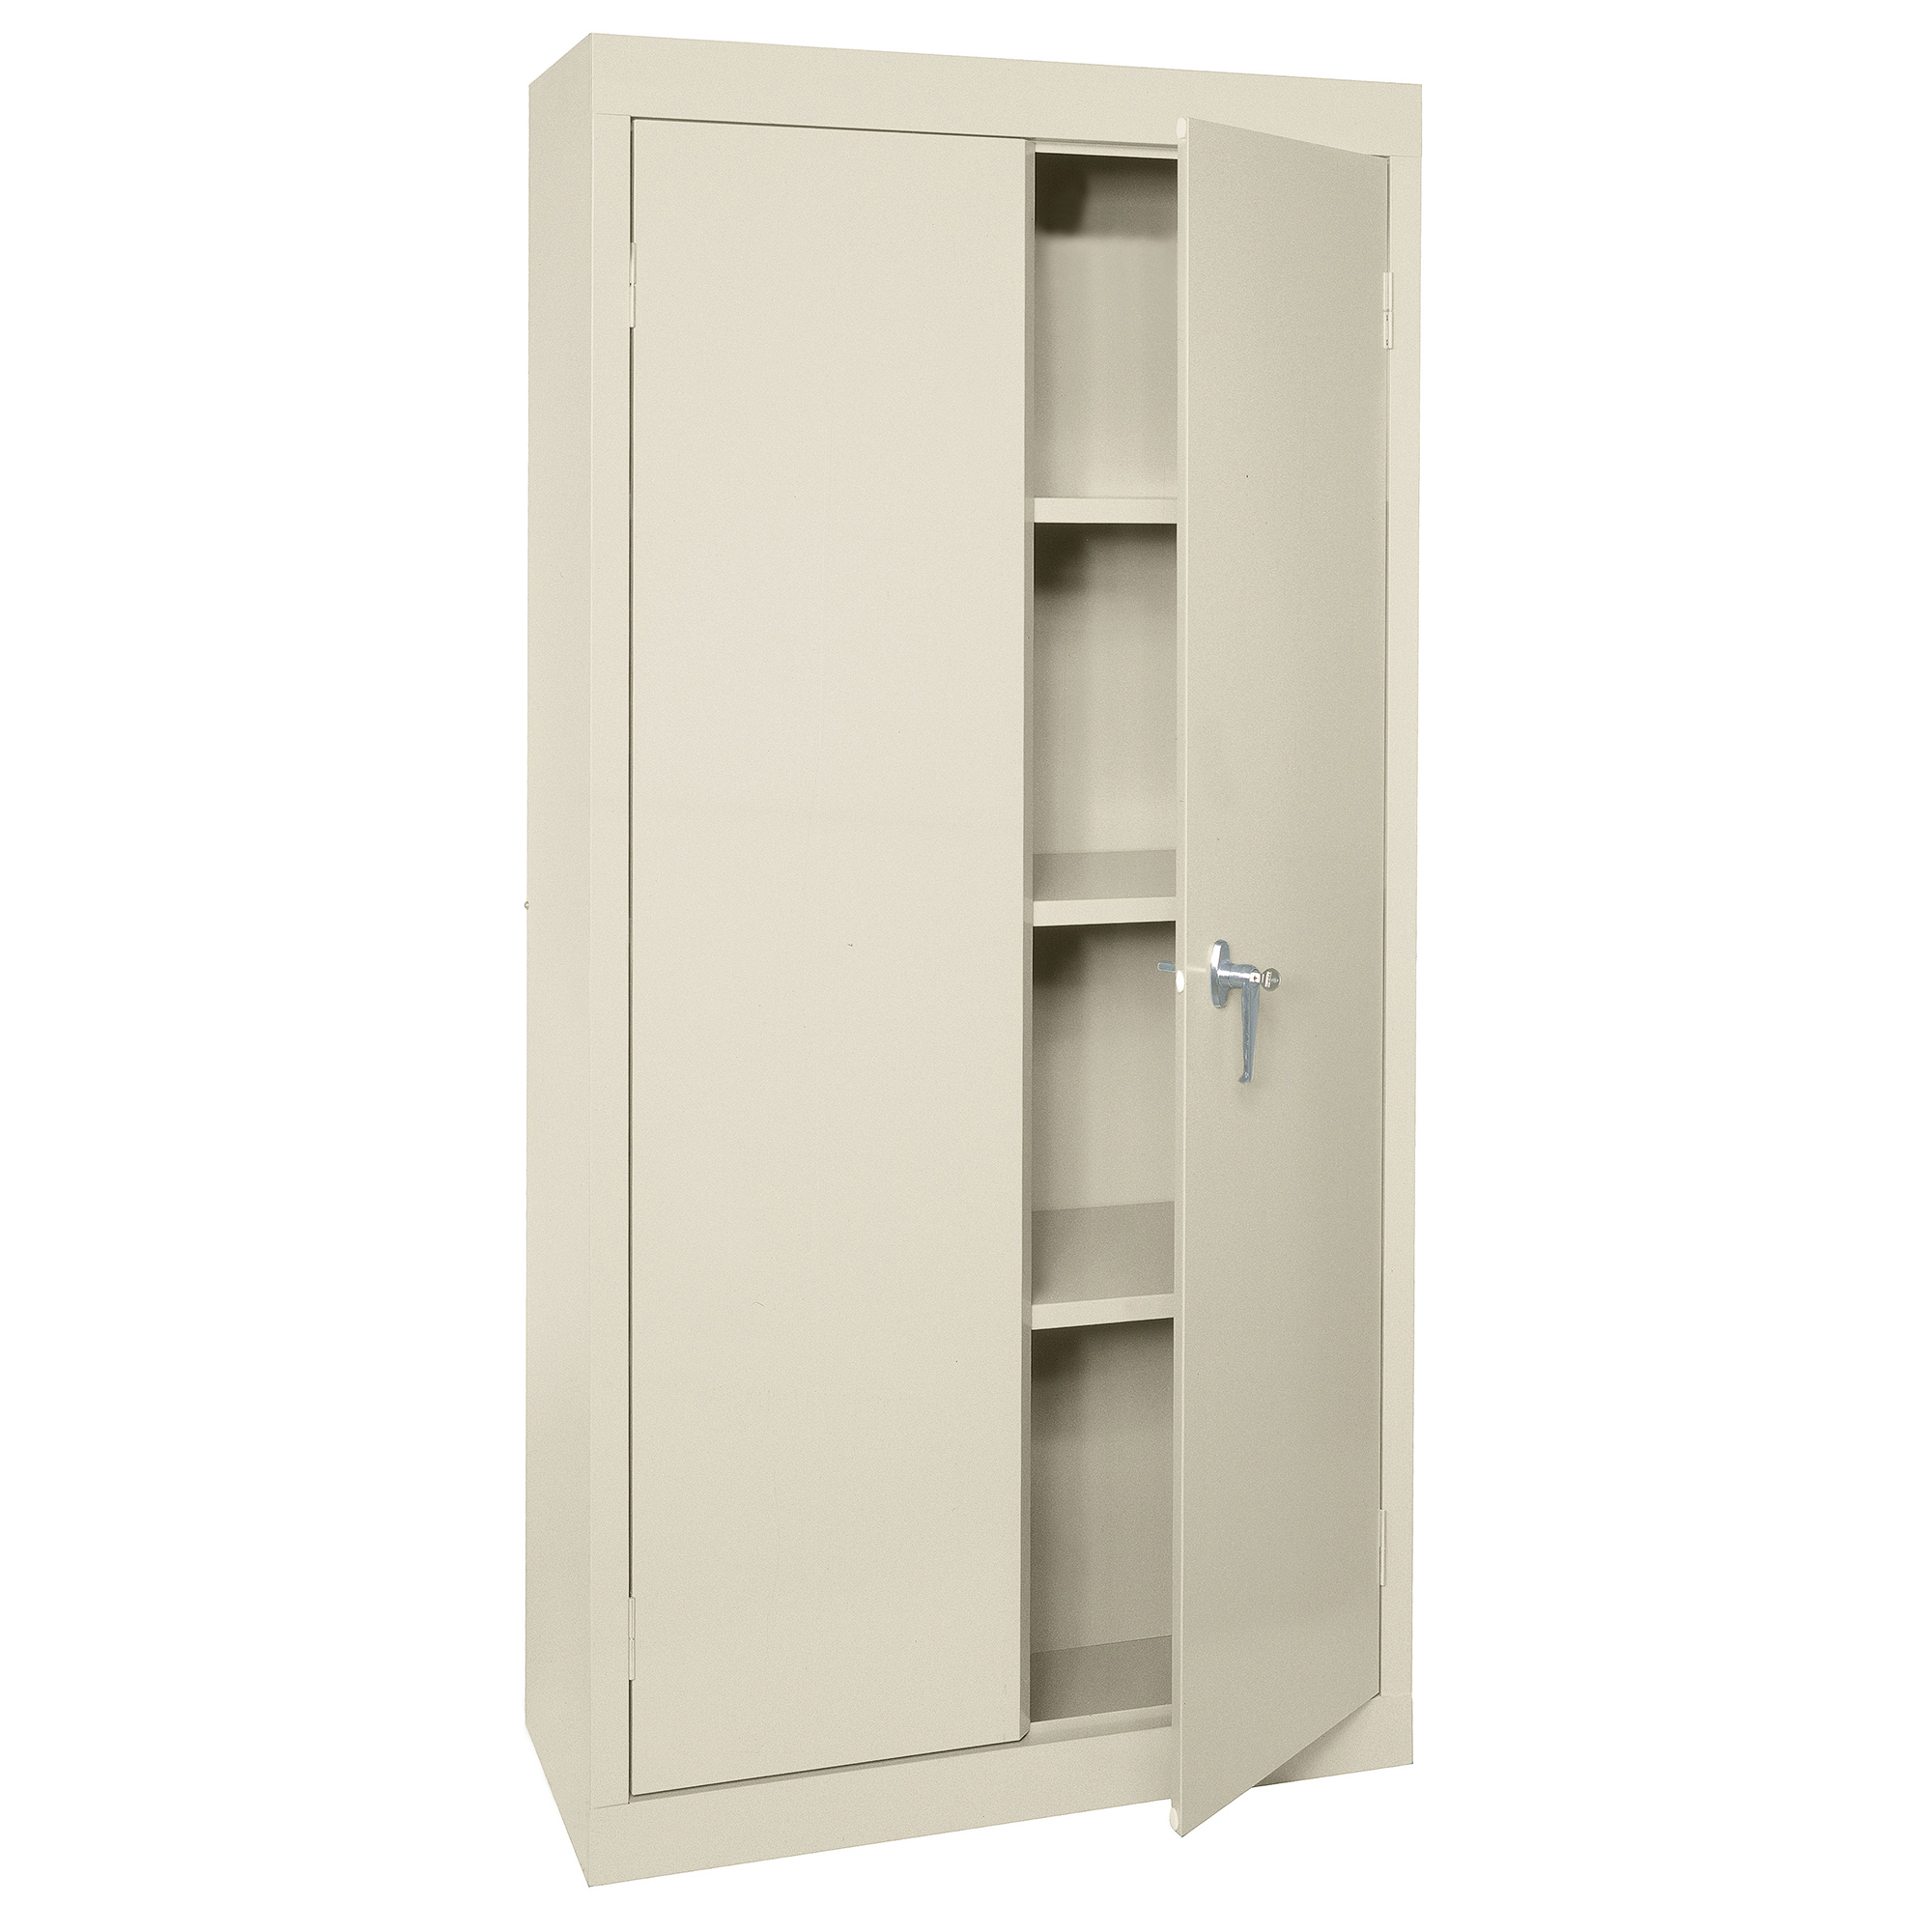 Sandusky Lee Sandusky, Value Line Cabinet 30x18x66 Putty, Height 66 in, Width 30 in, Color Putty, Model VF31301866-07